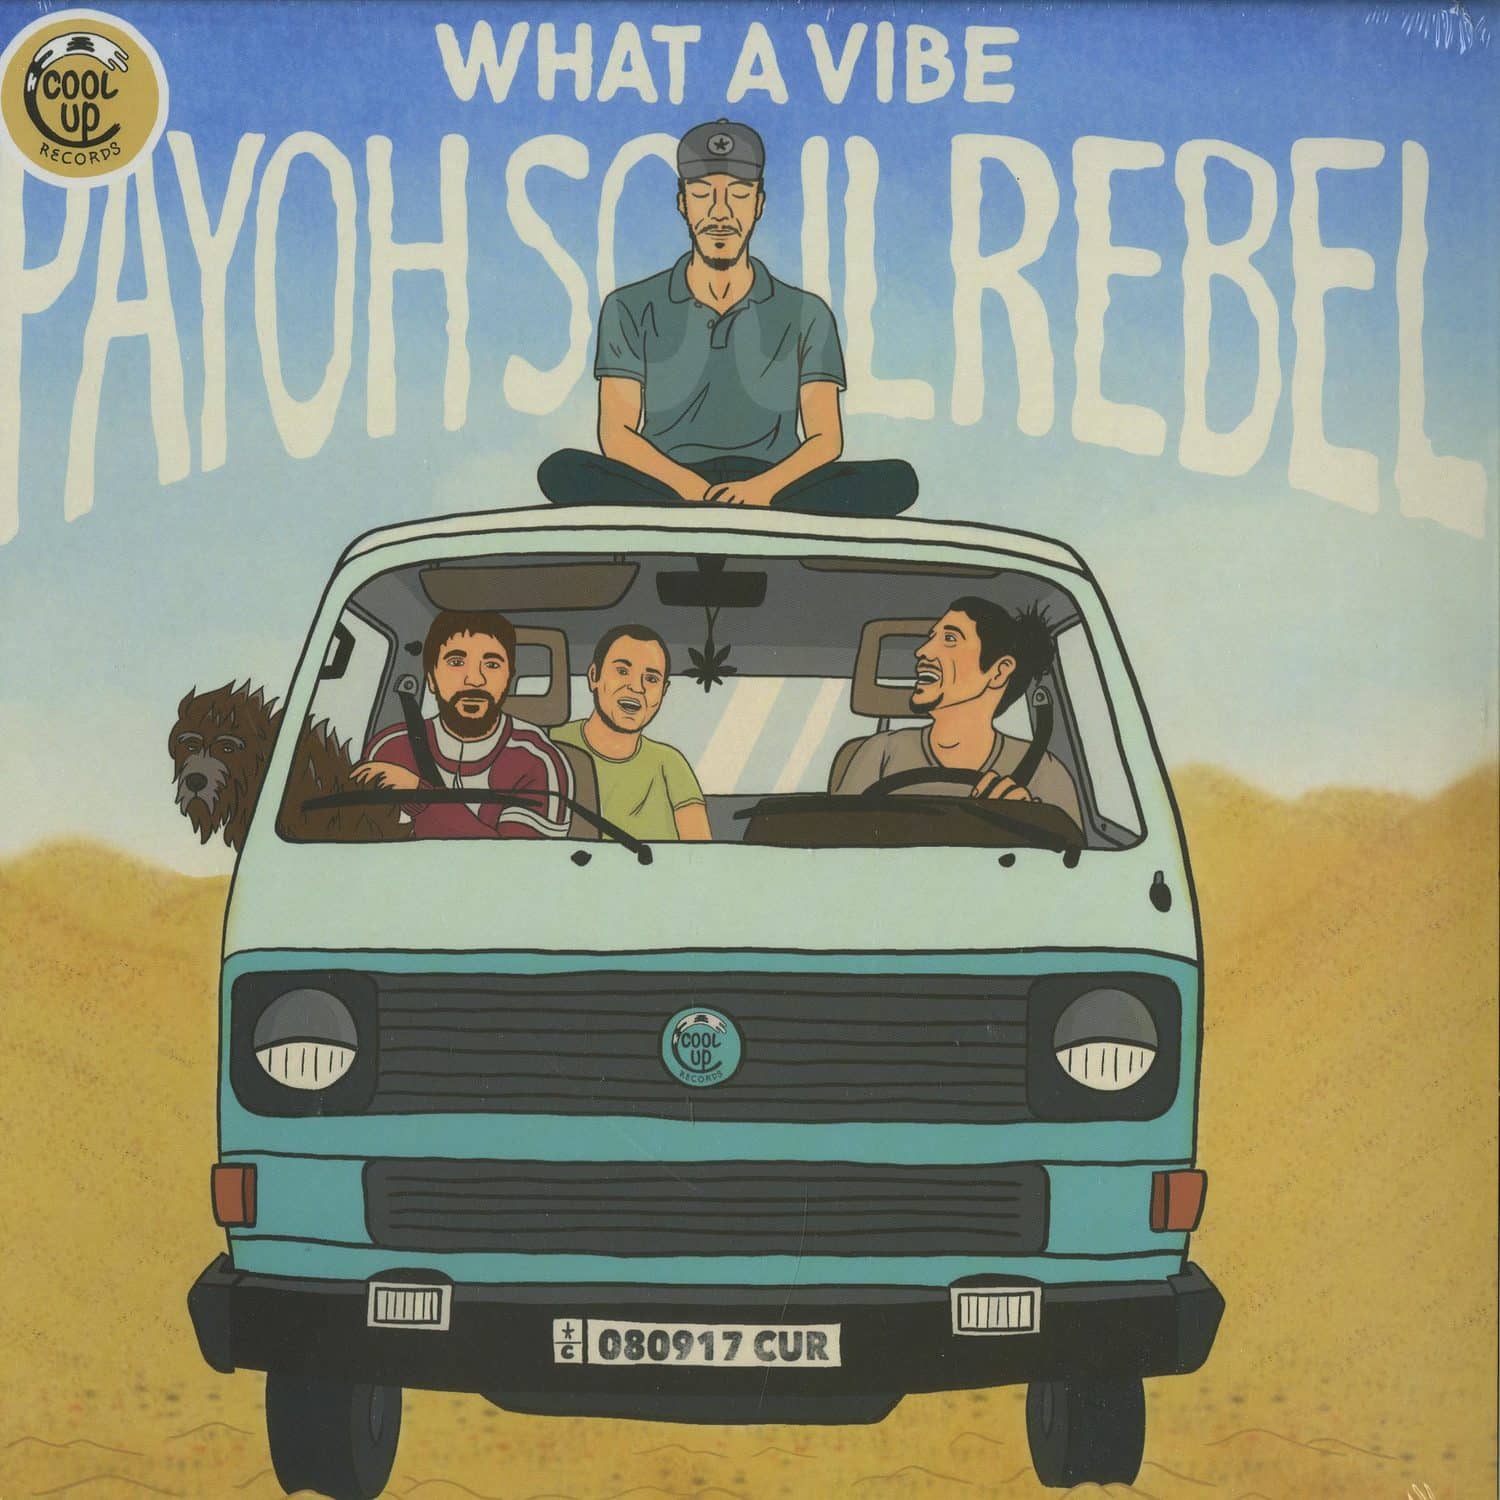 Payoh SoulRebel - WHAT A VIBE 